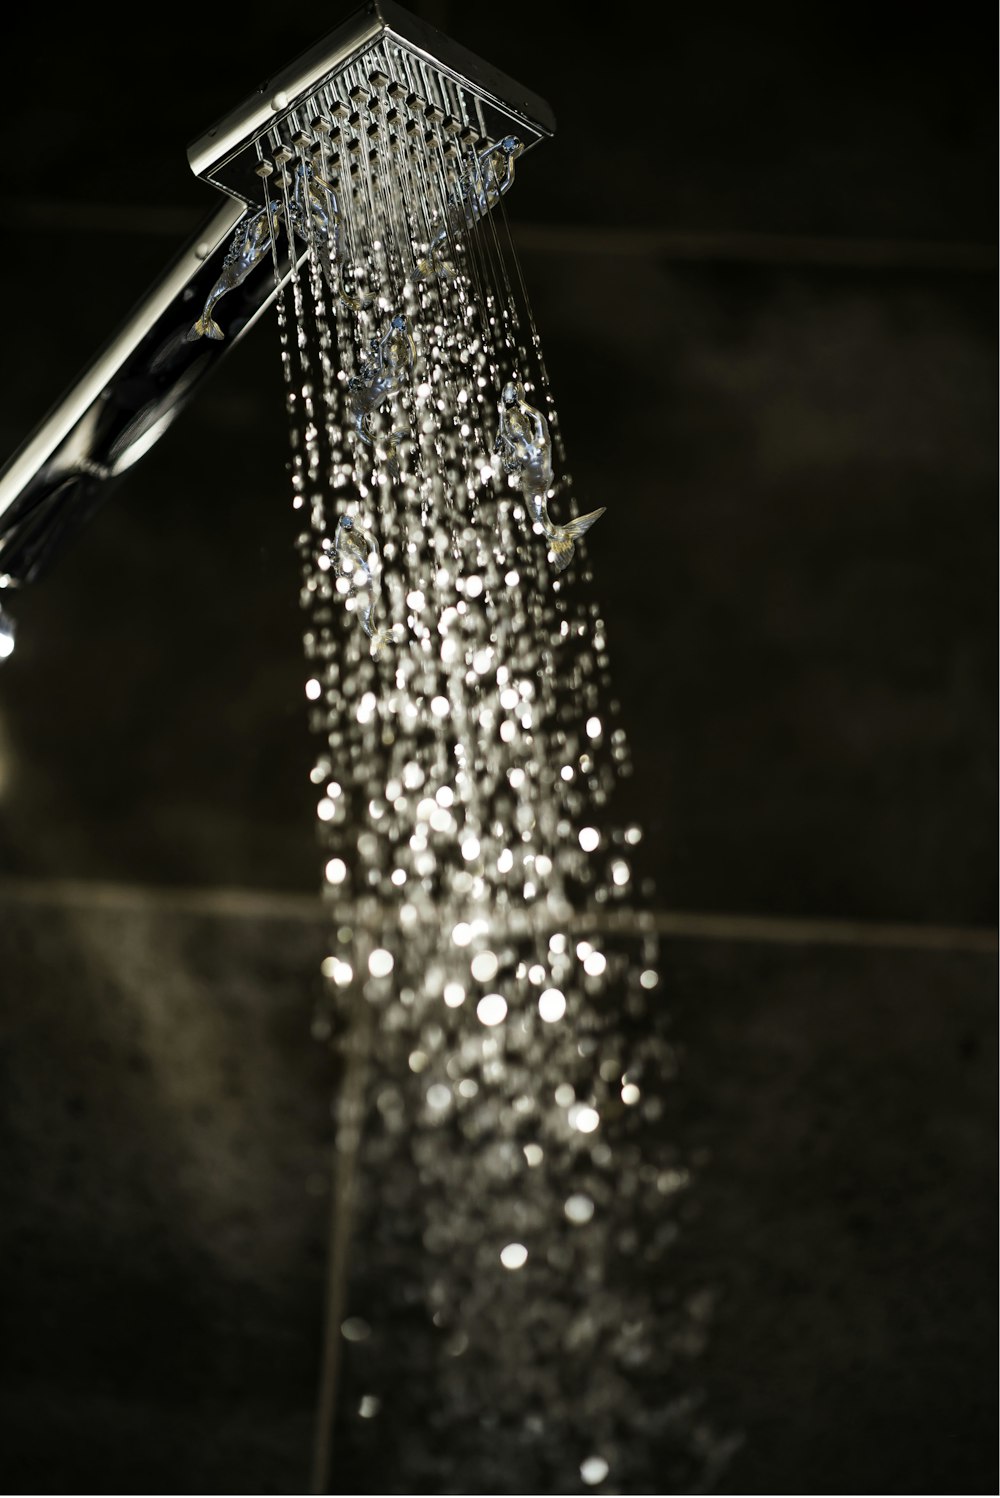 a close up of a shower head with water coming out of it